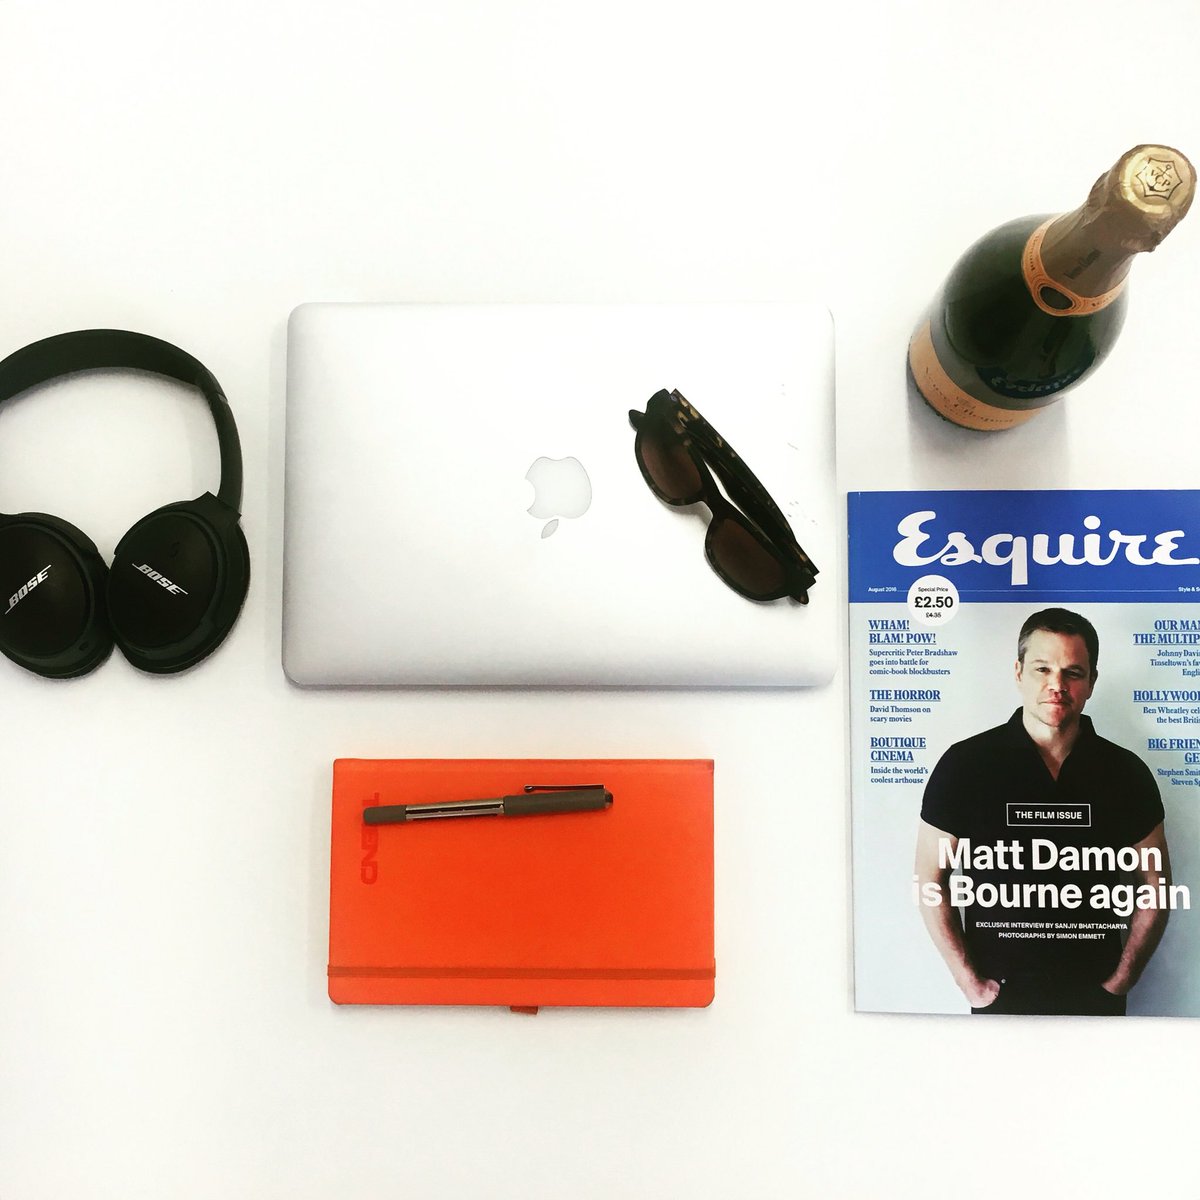 @Bose Soundlinks, a pair of @tens and the new @EsquireUK ...#DeskEssentials ✌️